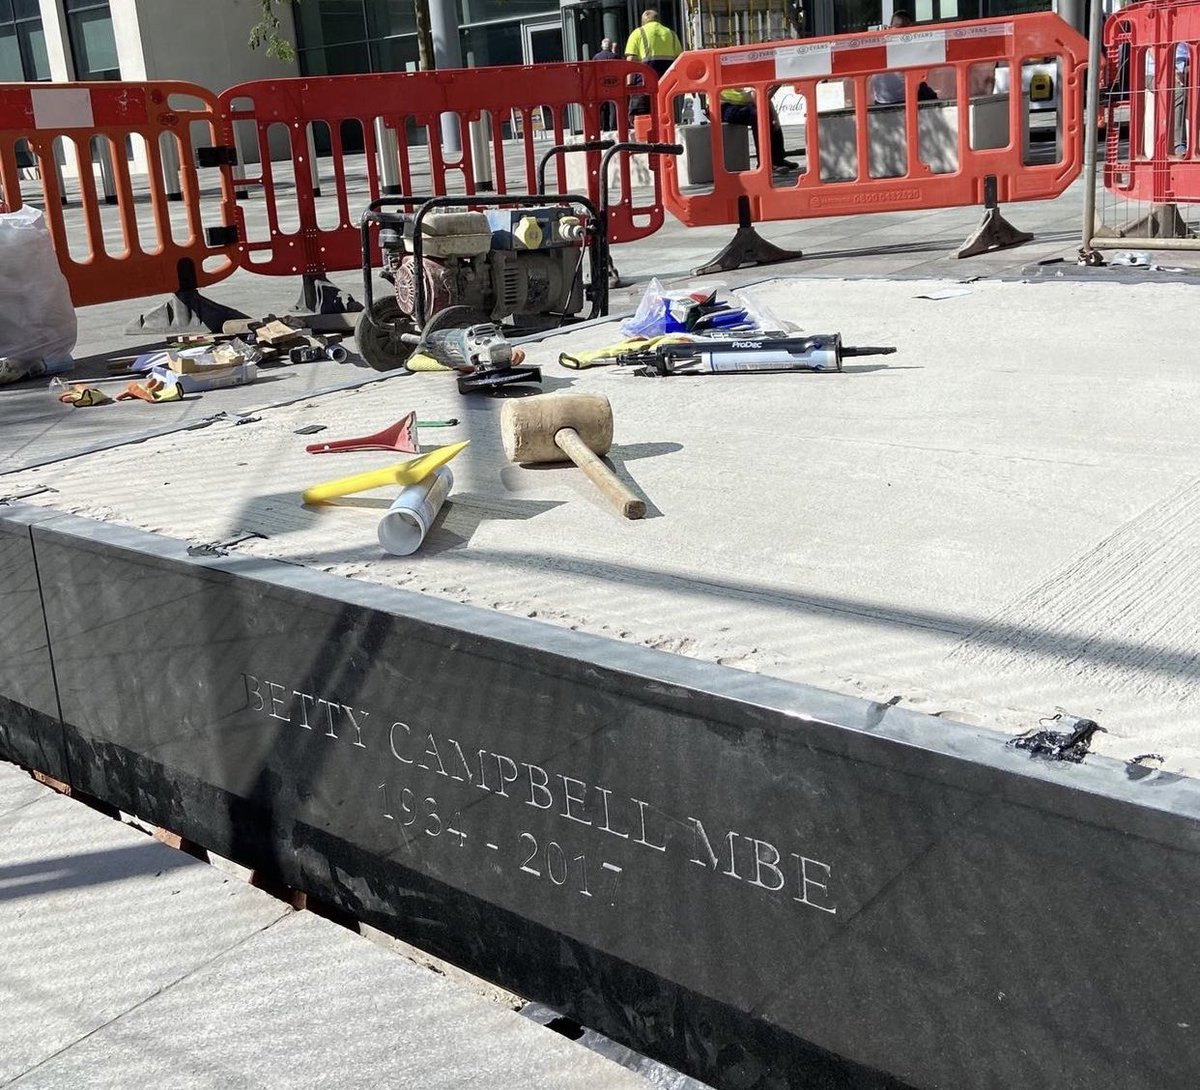 The plinth for the #BettyCampbellMonument has been completed ready for the unveiling on the 29th. Only 9 days to go! #HiddenHeroines #BettyCampbell #MonumentalWelshWomen #MakingHerStory